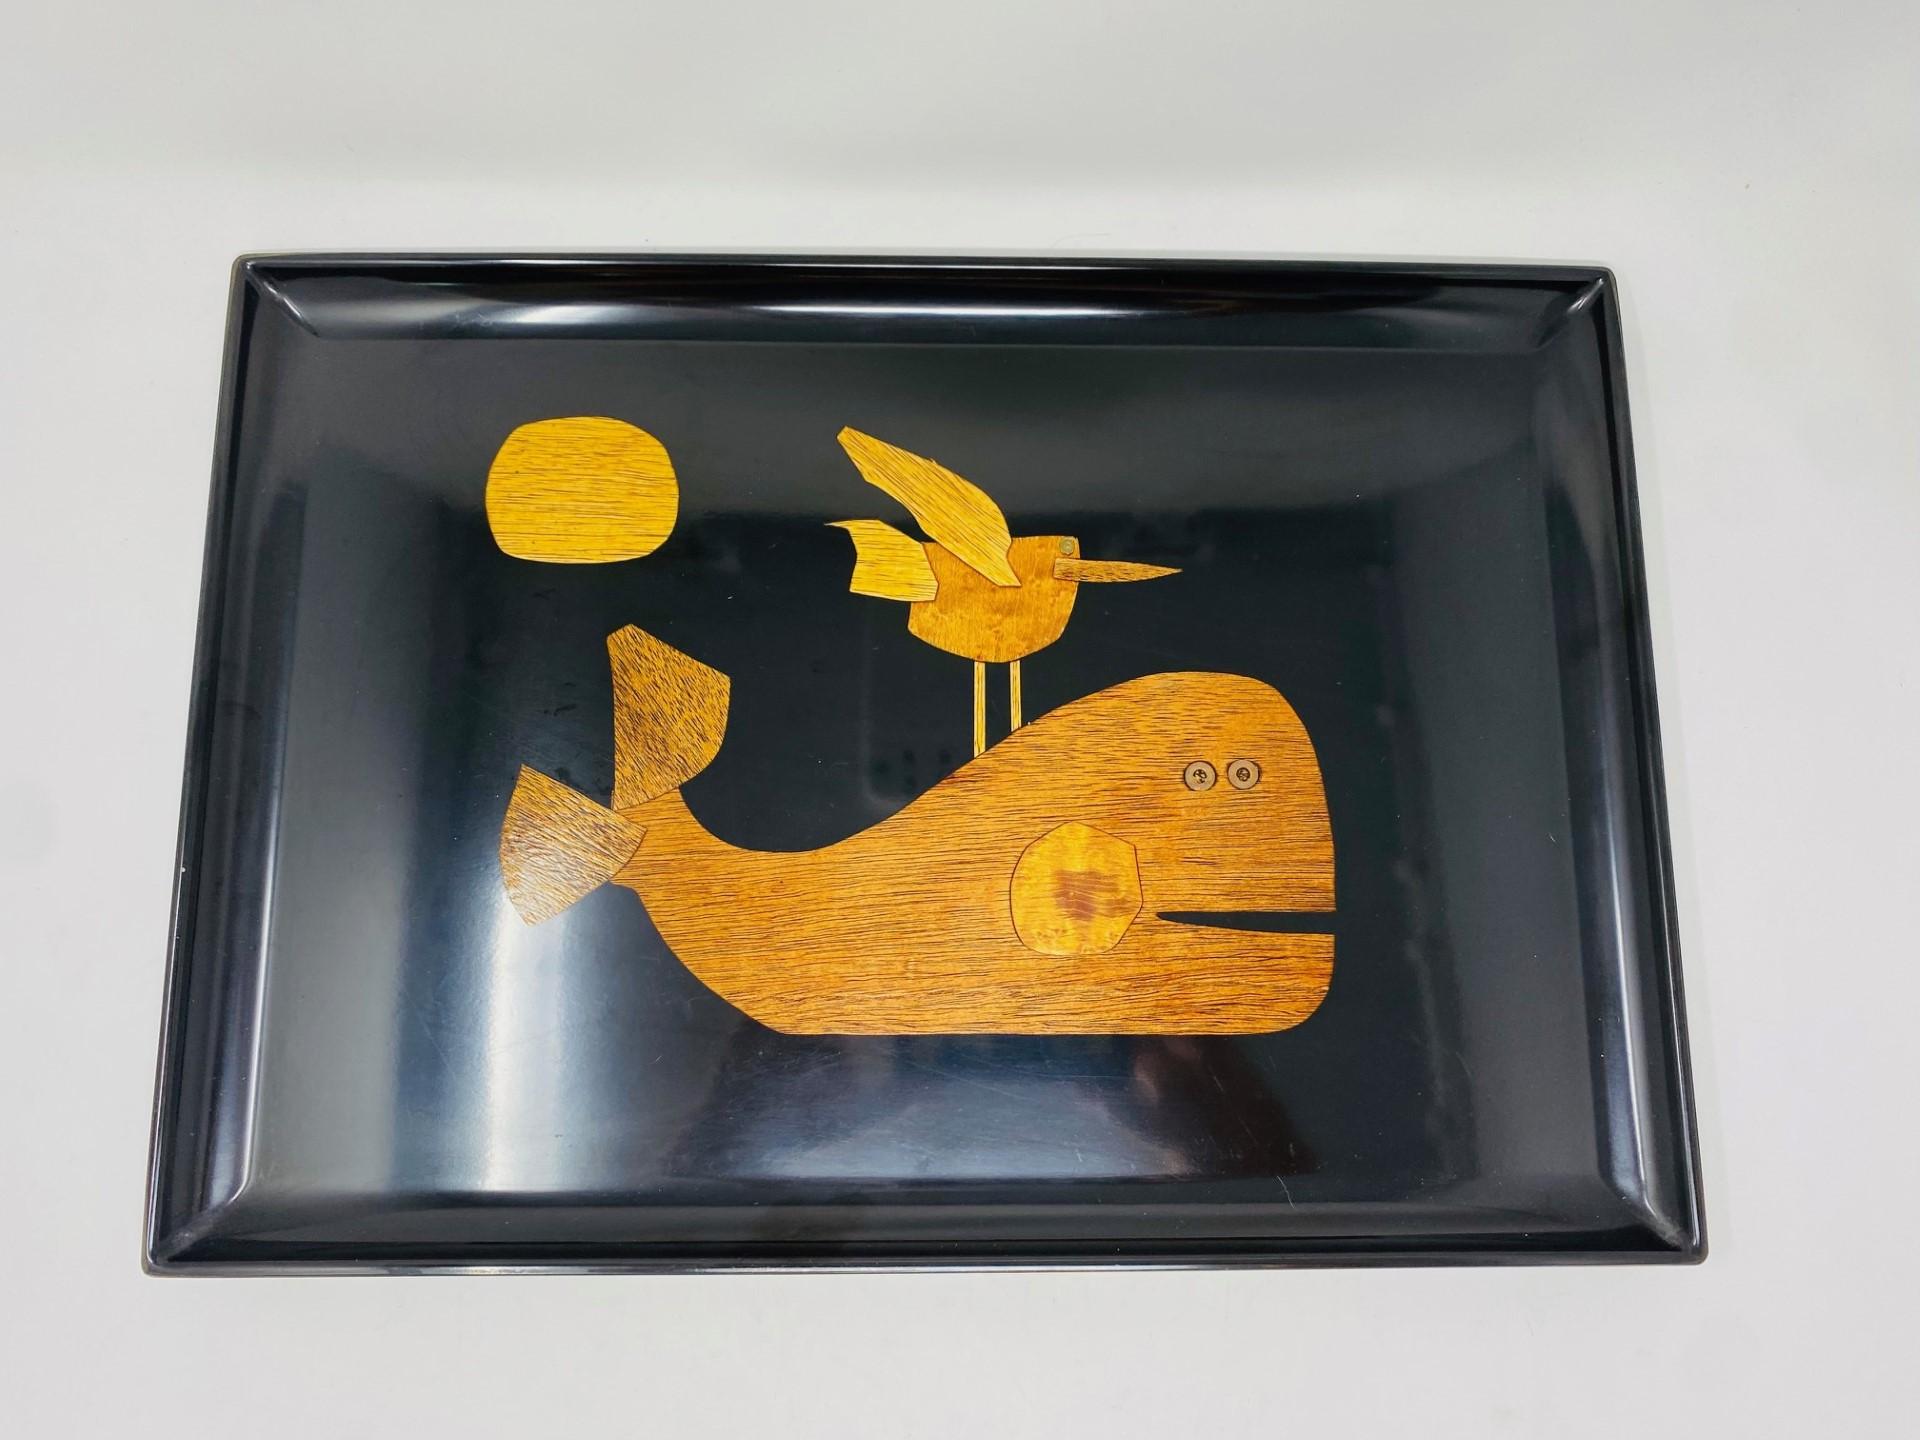 Mid 20th century serving tray by Couroc of Monterey, made from phenolic resin and inlaid with wood and brass depicting a whale with a bird perched on its back and the sun in the sky. Phenolic resin is resistant to damage from alcohol and water. 